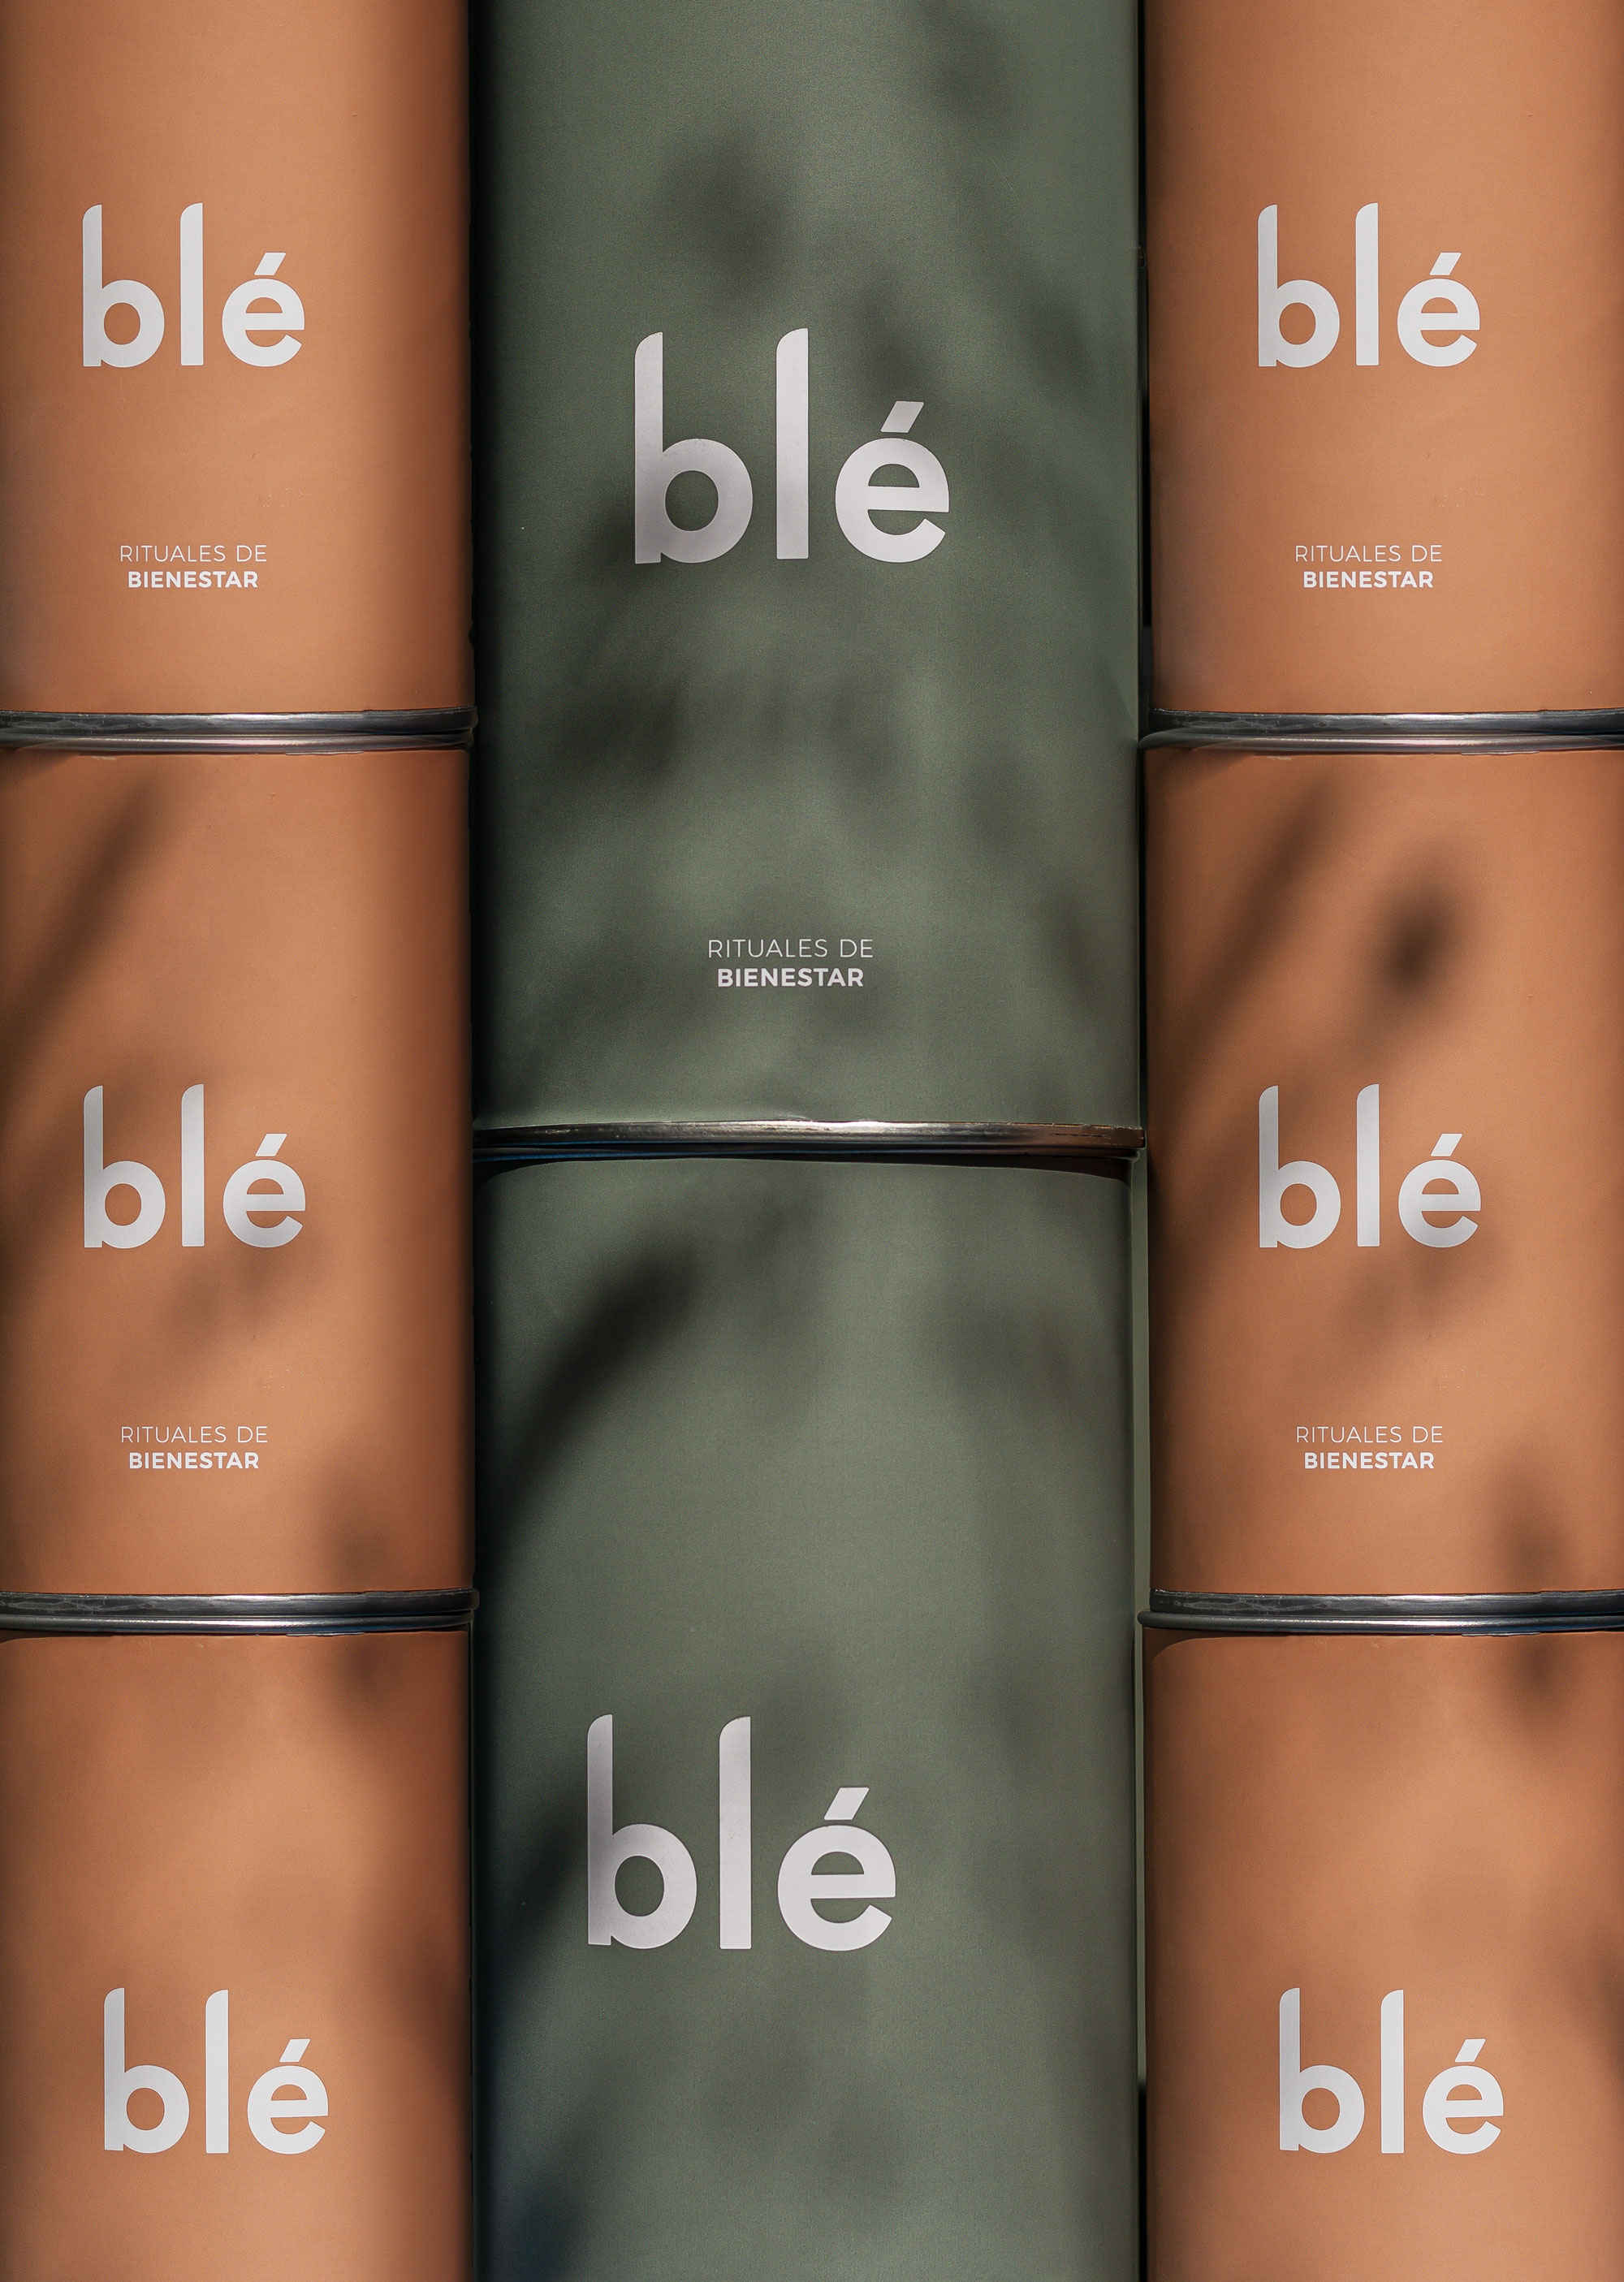 Brand and Packaging Redesign for Blé Costa Rica by Delmar Studio